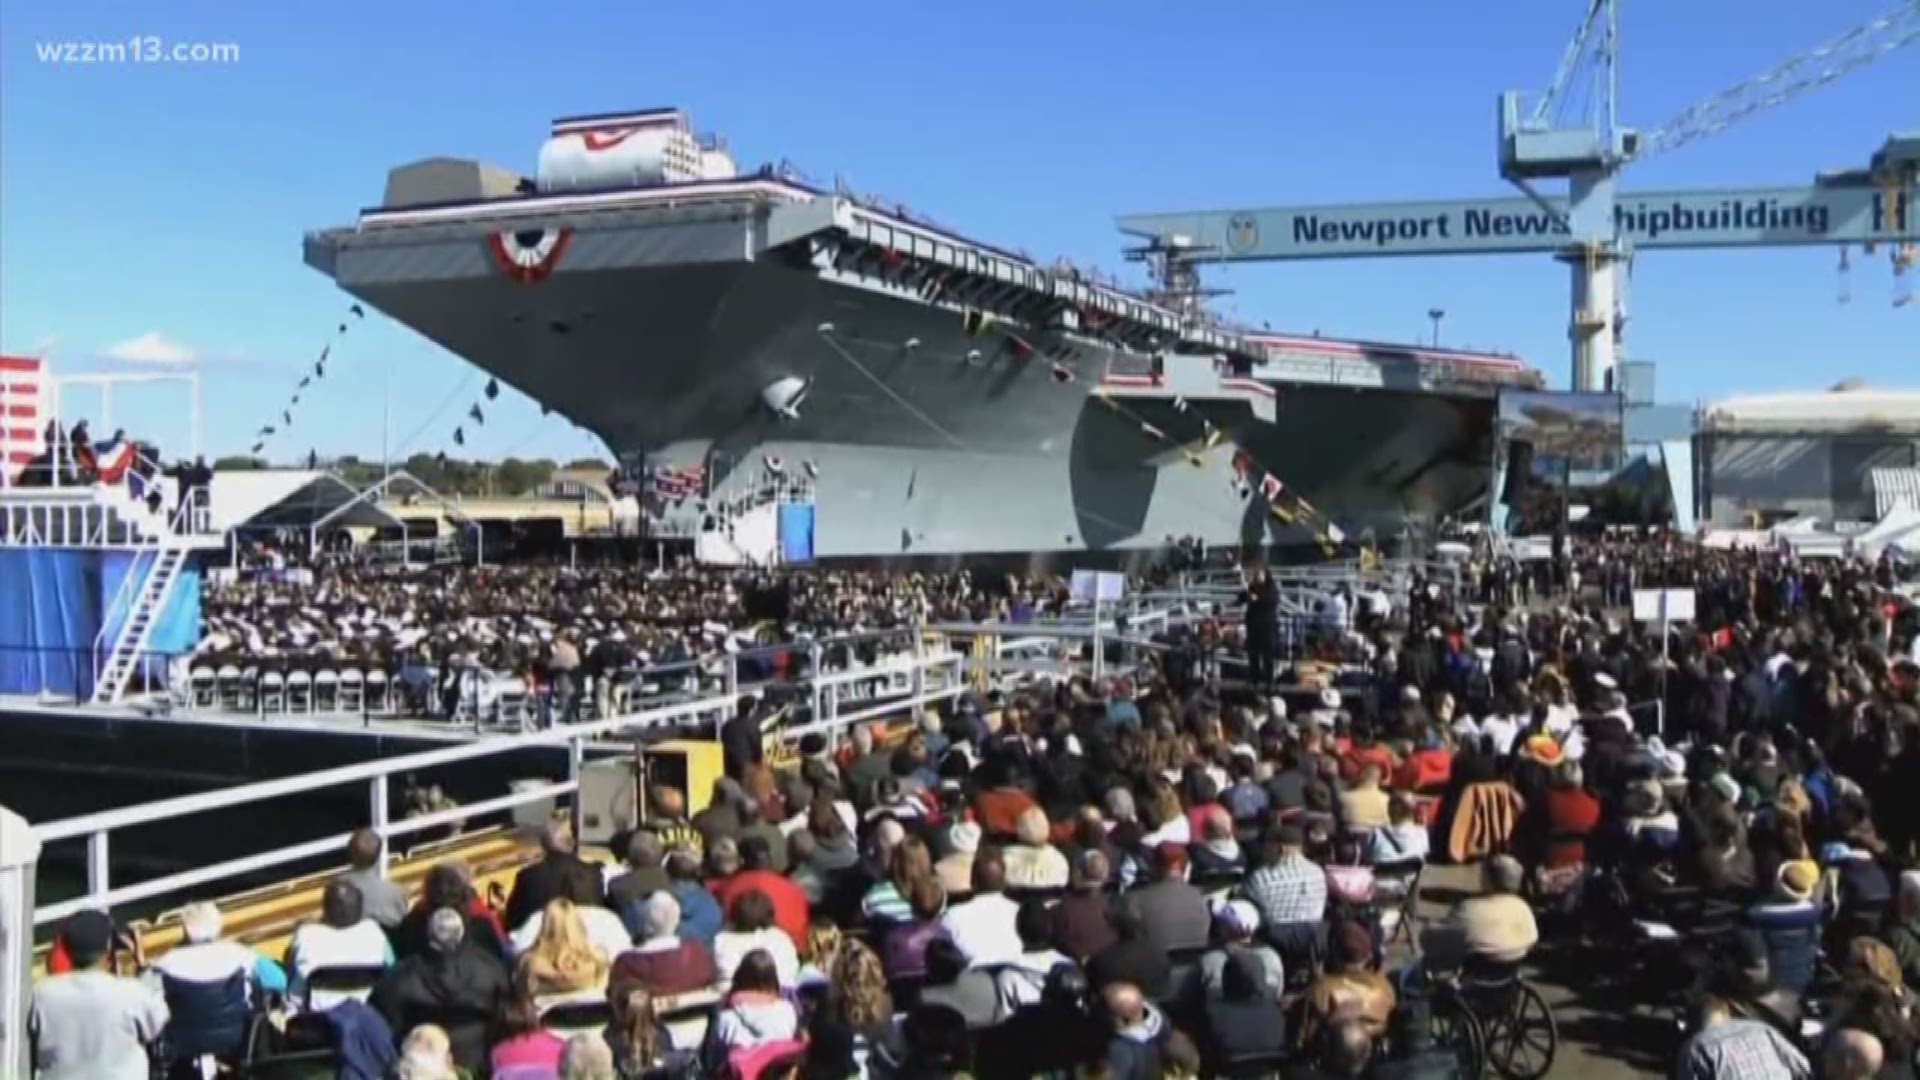 Some background on the USS Gerald R Ford aircraft super-carrier